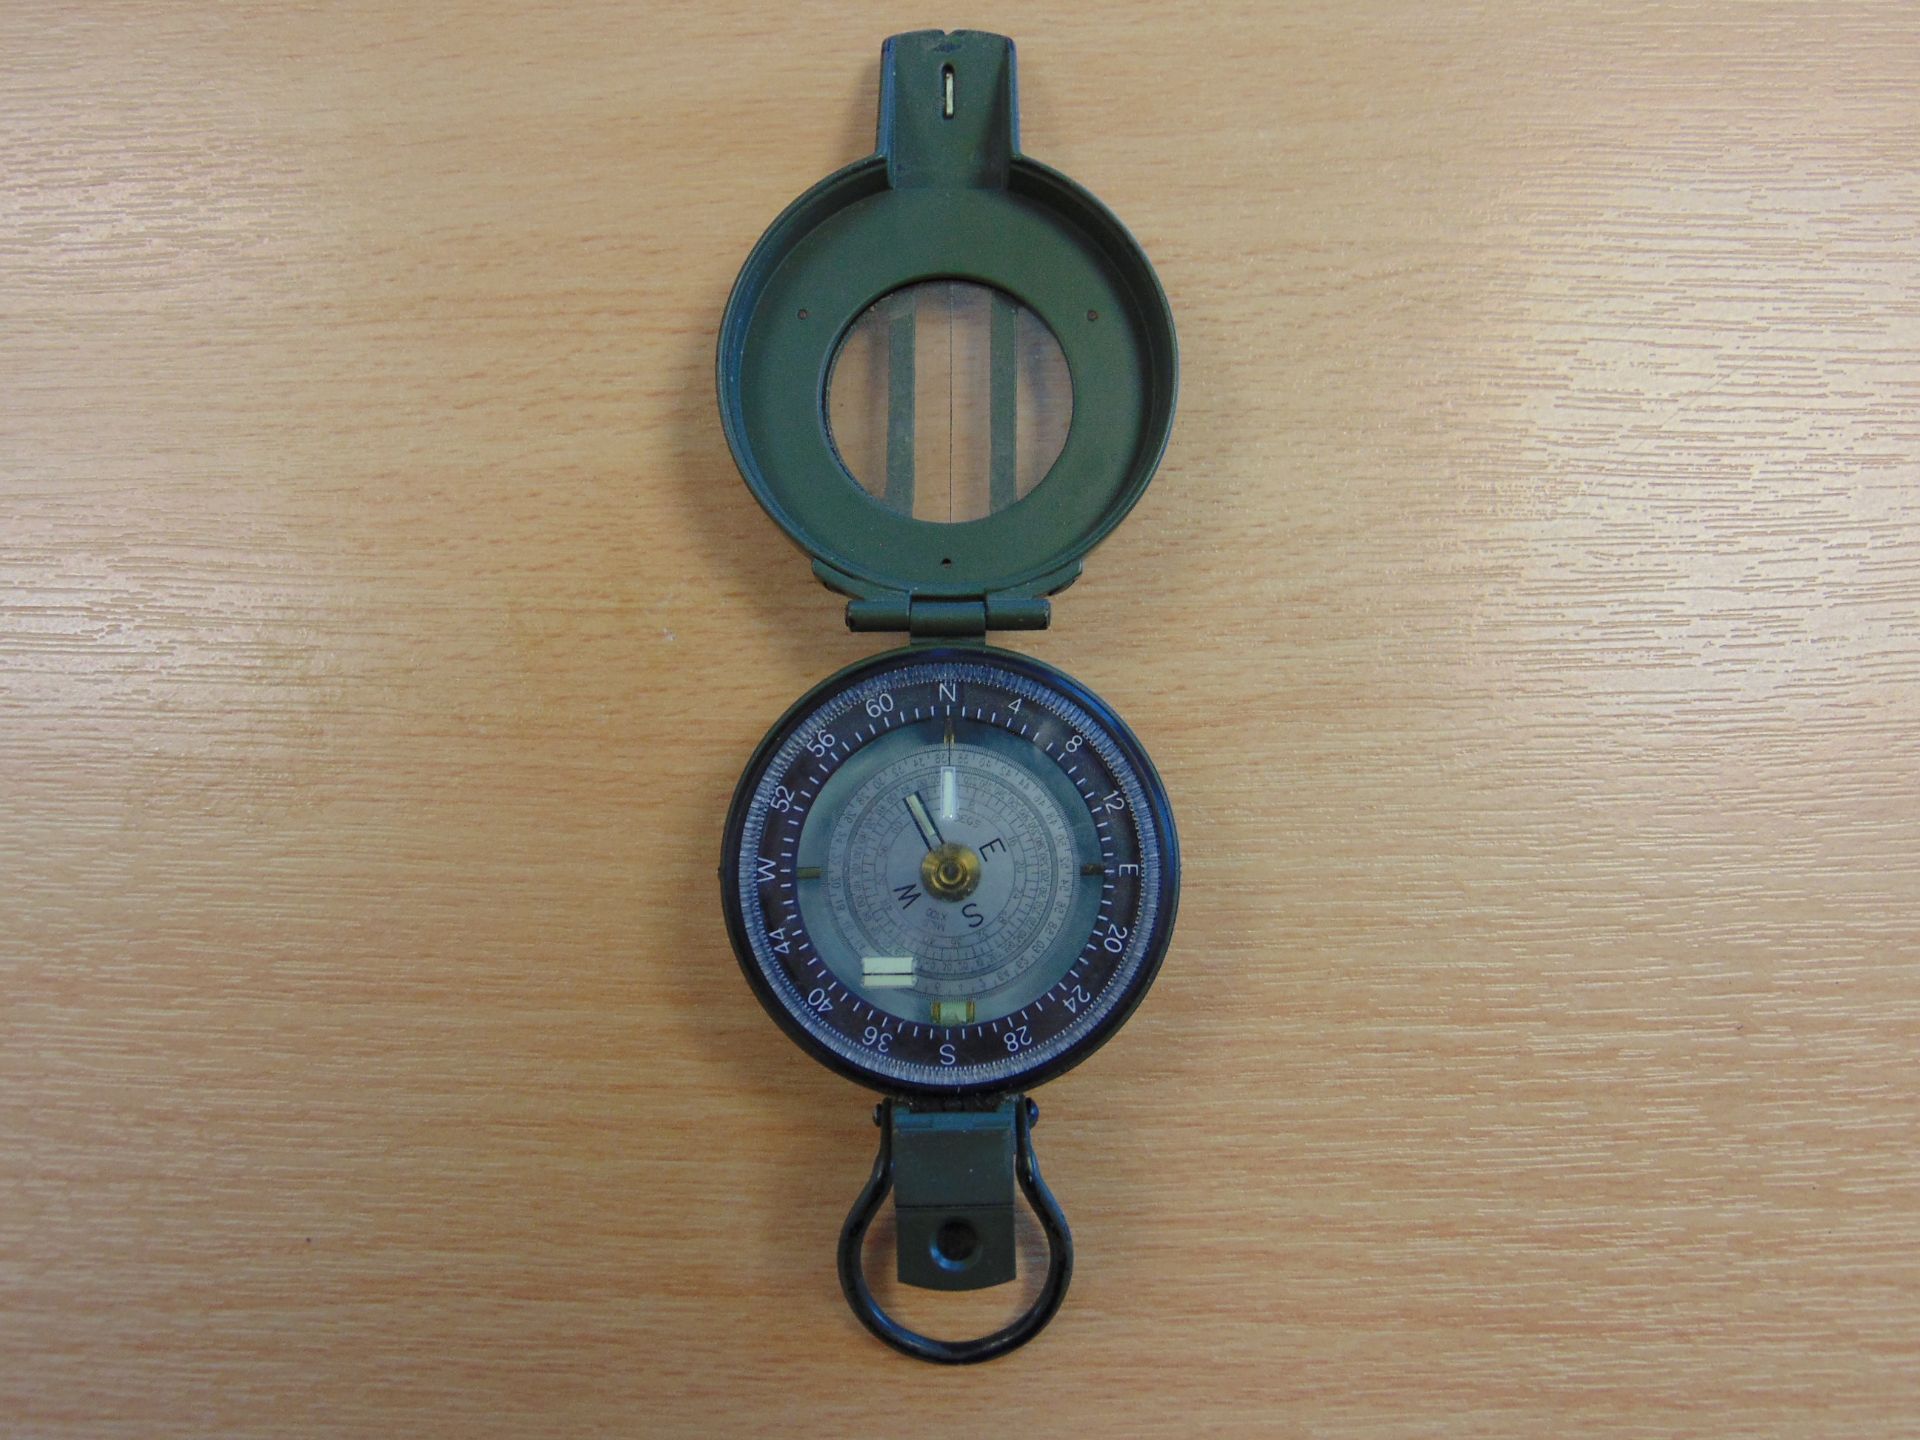 Francis Barker British Army Prismatic Compass in Mils - Image 4 of 13